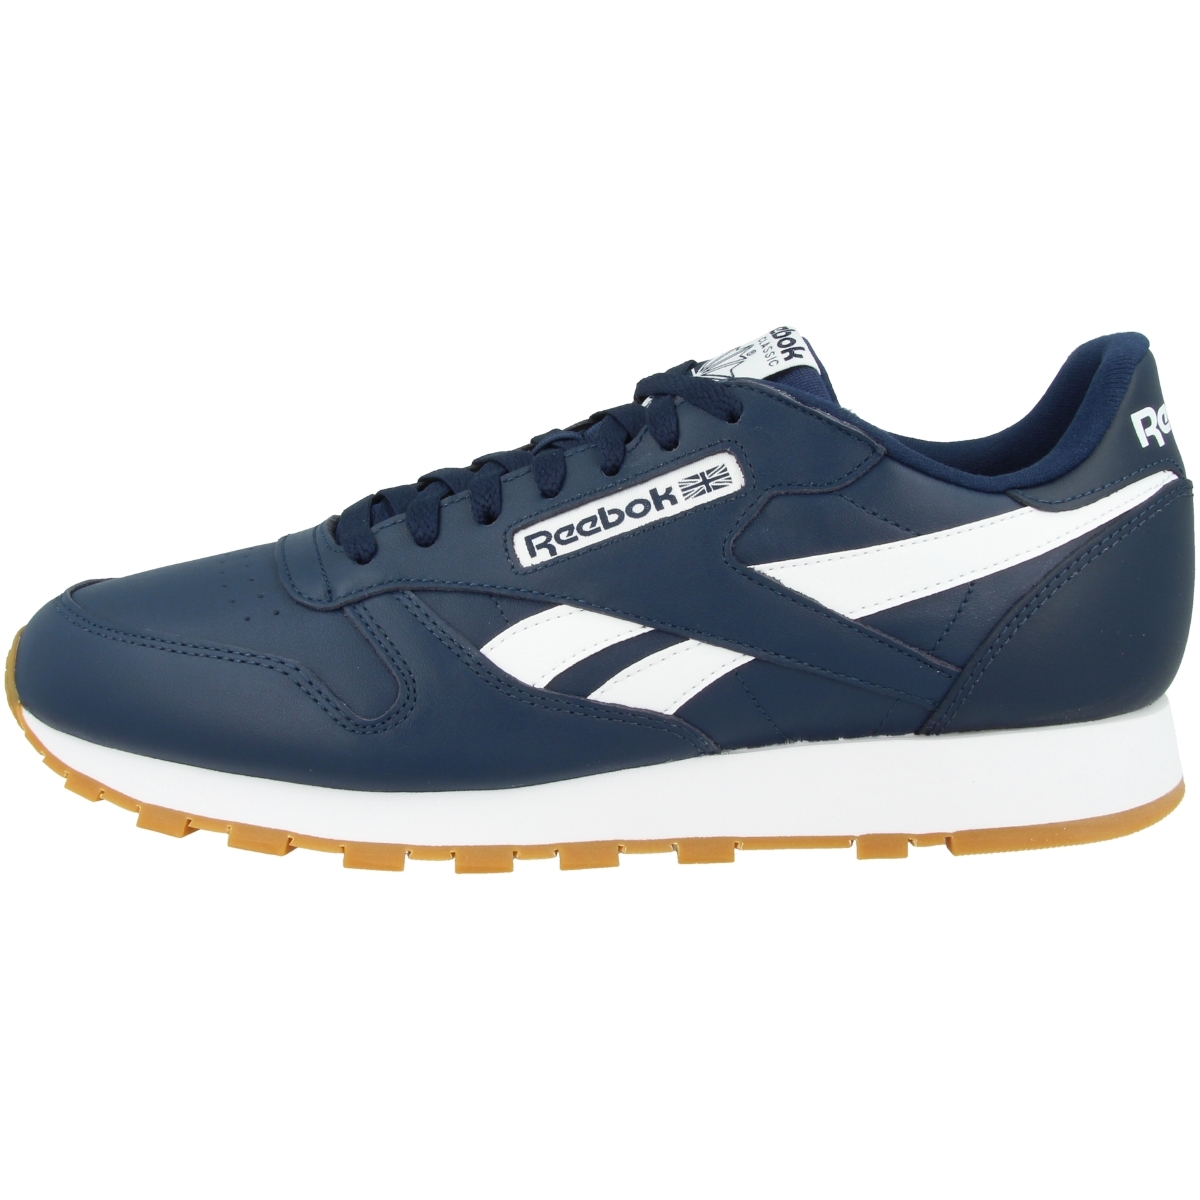 Reebok Classic Leather Men's Shoes Casual Trainers Sports Fitness ...